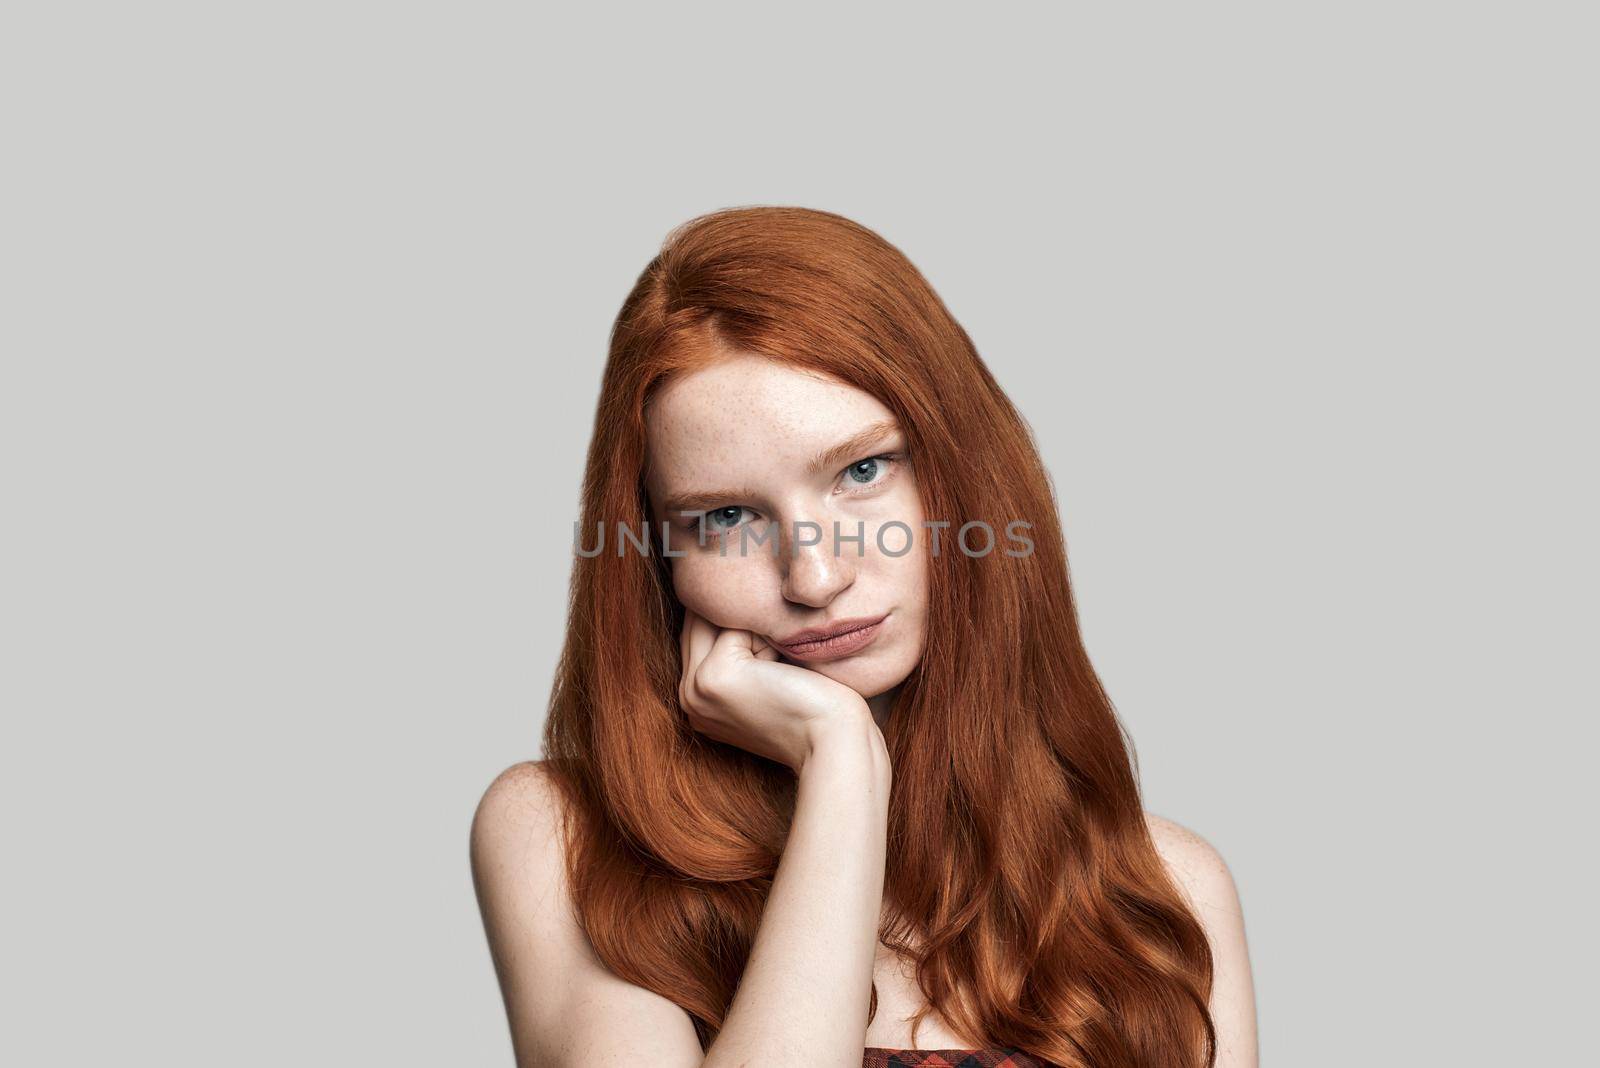 Feeling boring. Portrait of frustrated girl with red hair making sad face while standing against grey background by friendsstock